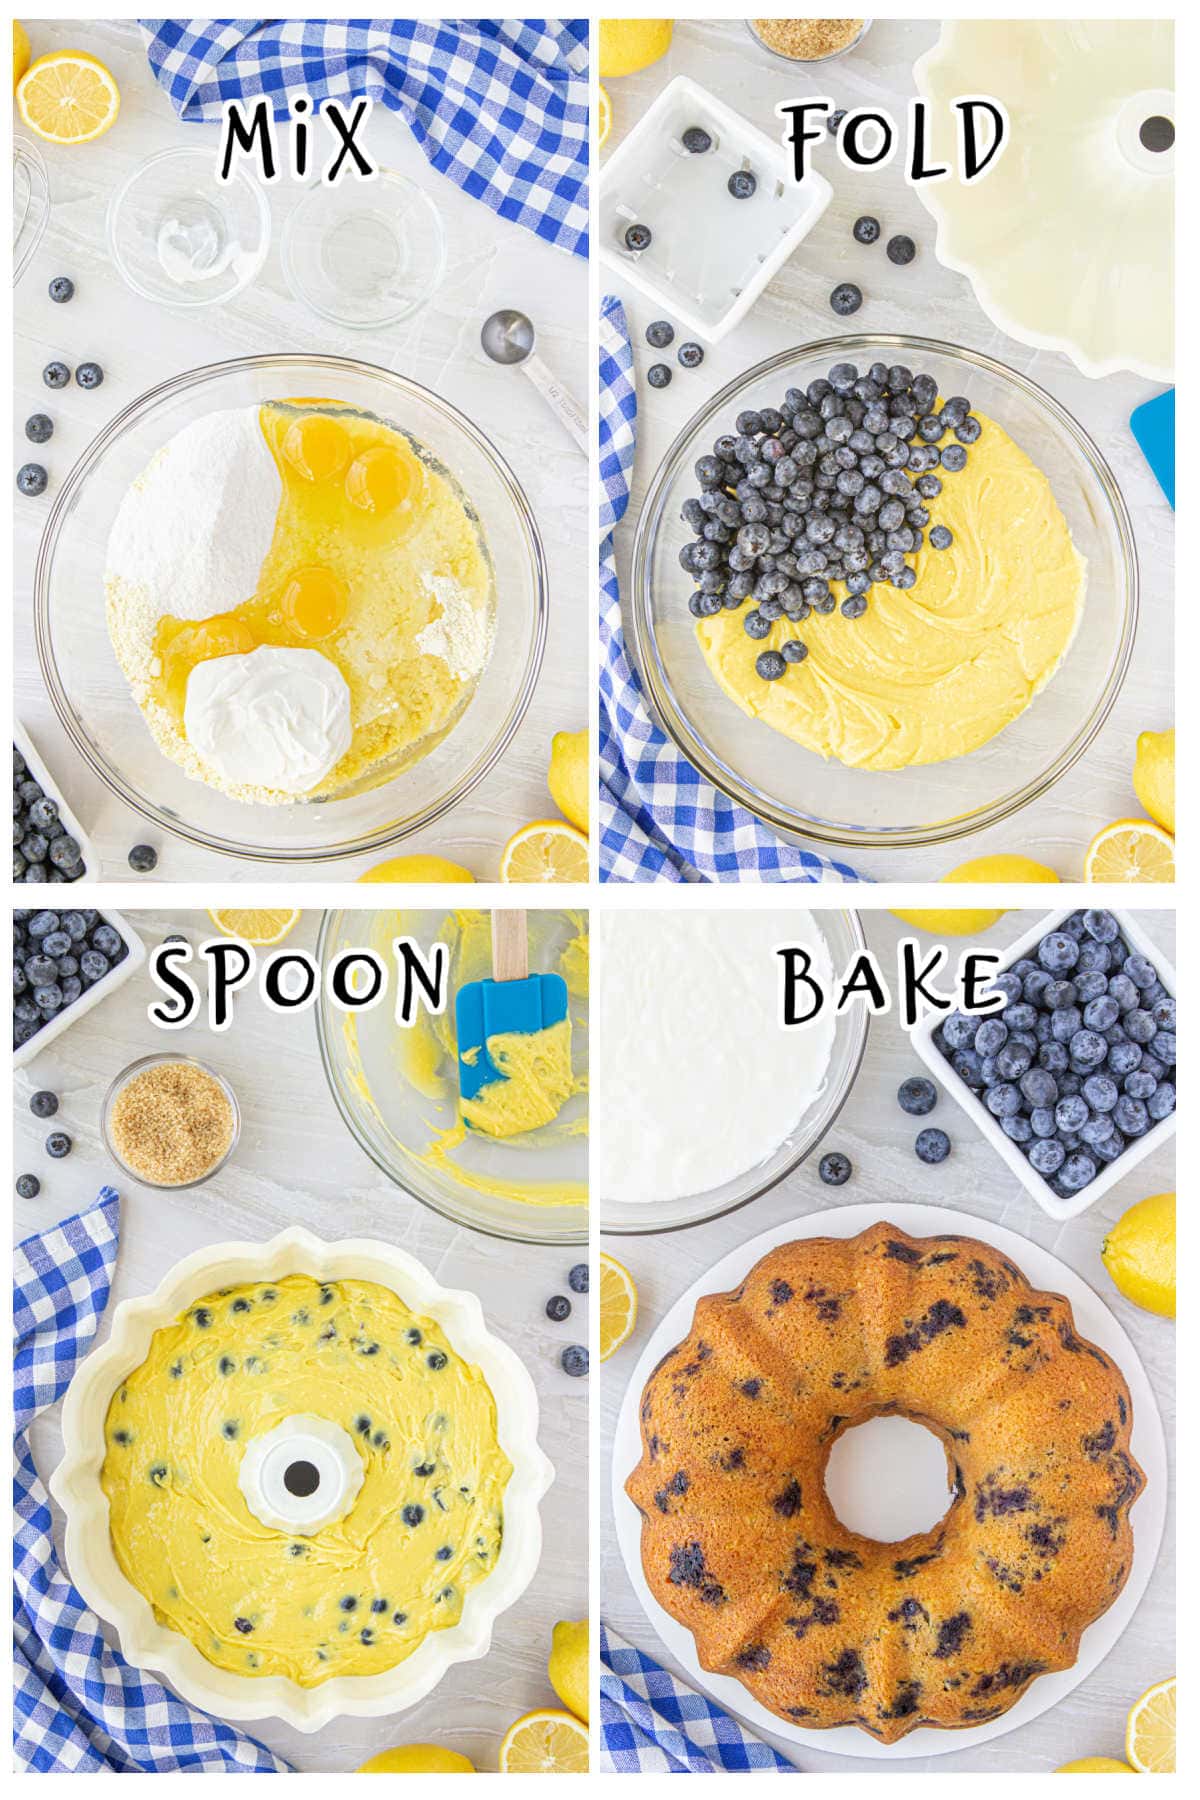 Step by step images for making this cake.